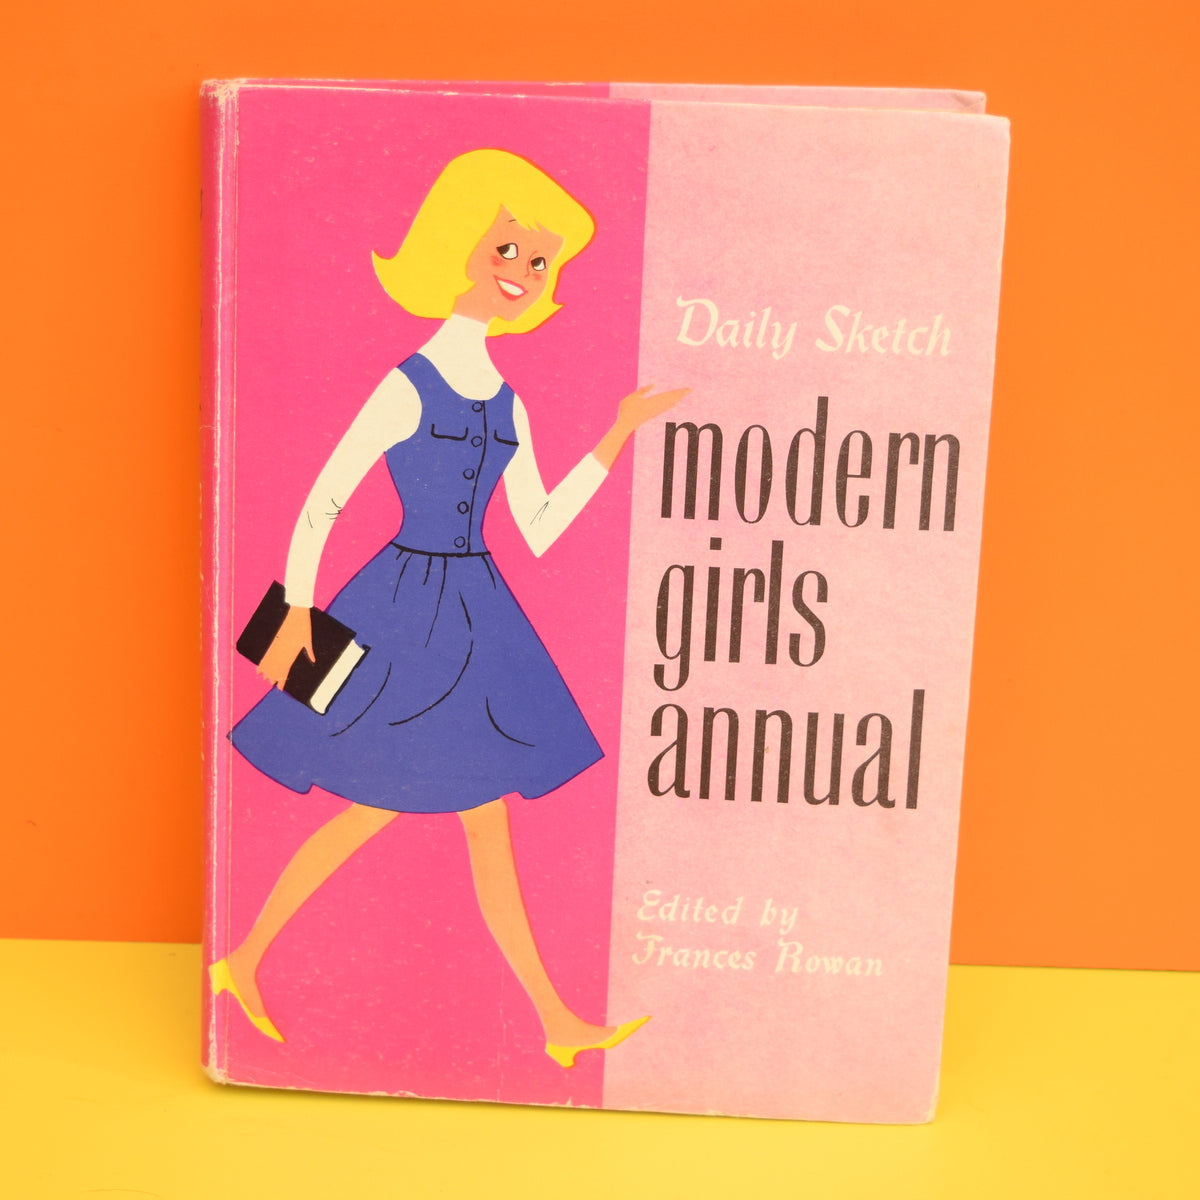 Vintage 1950s Daily Sketch Modern Girls Annual - lovely Illustrations